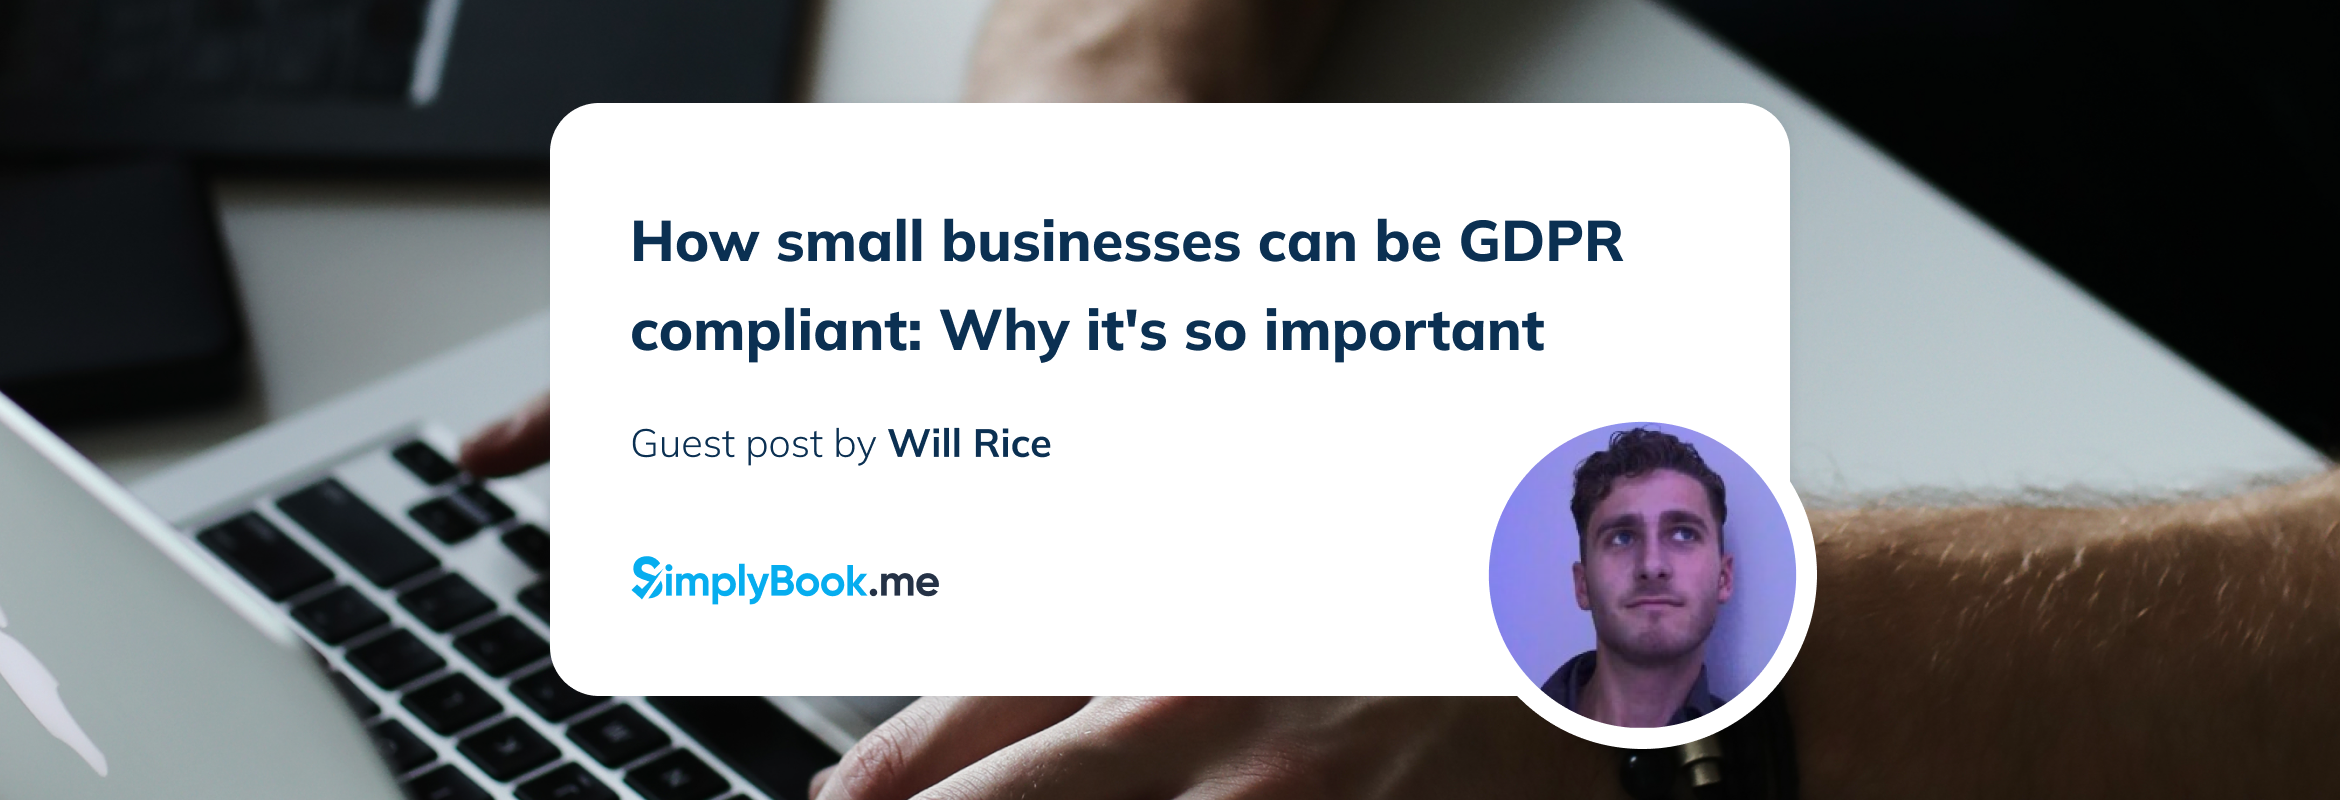 How small businesses can be GDPR compliant_ Why it's so important